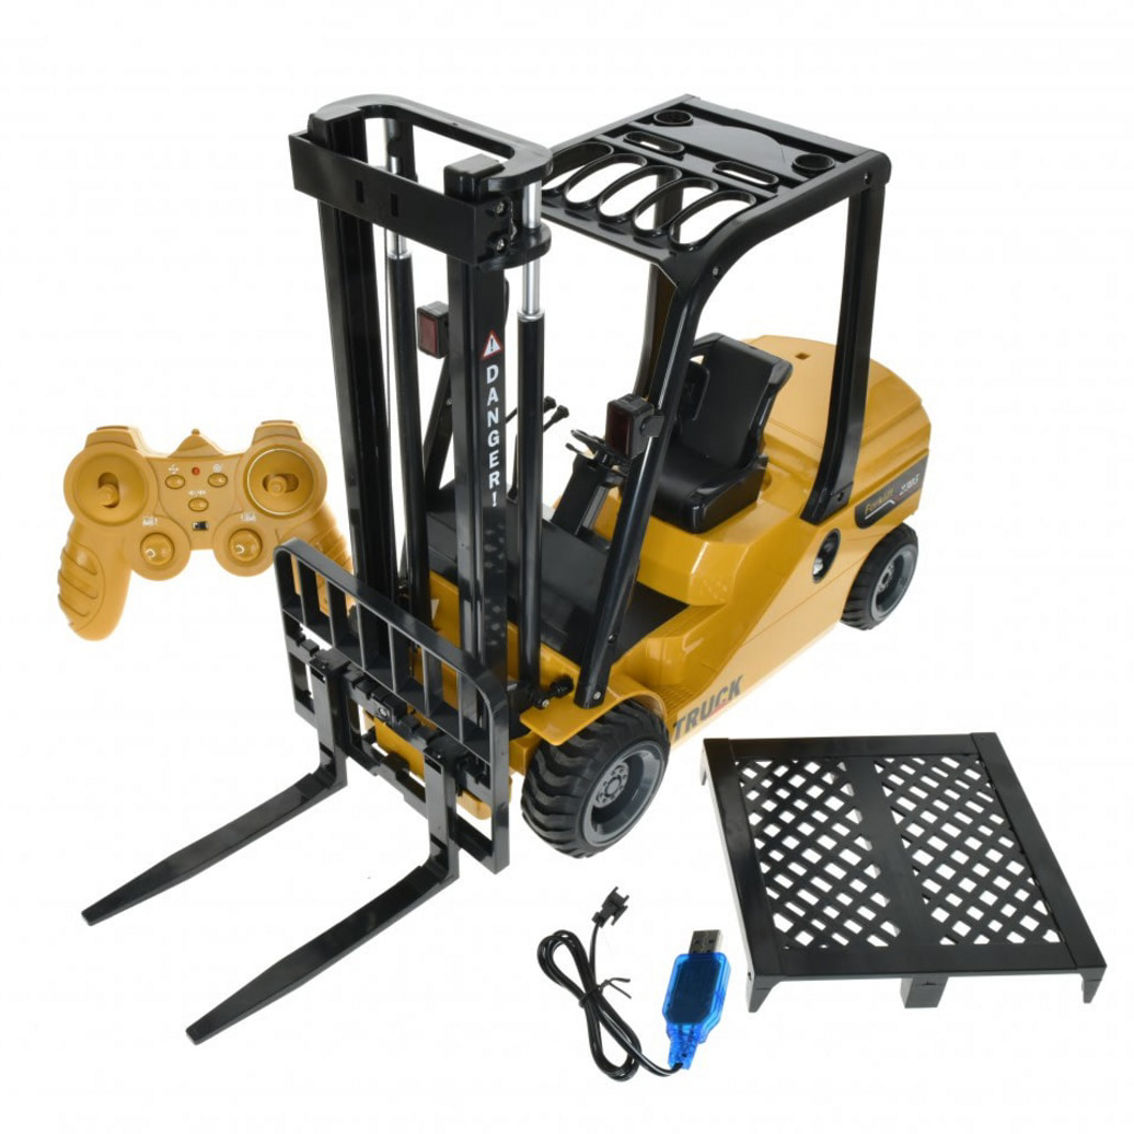 CIS-2305 1:14 scale fork lift with lights sound 2.4 GHz rechargeable batteries - Image 2 of 5